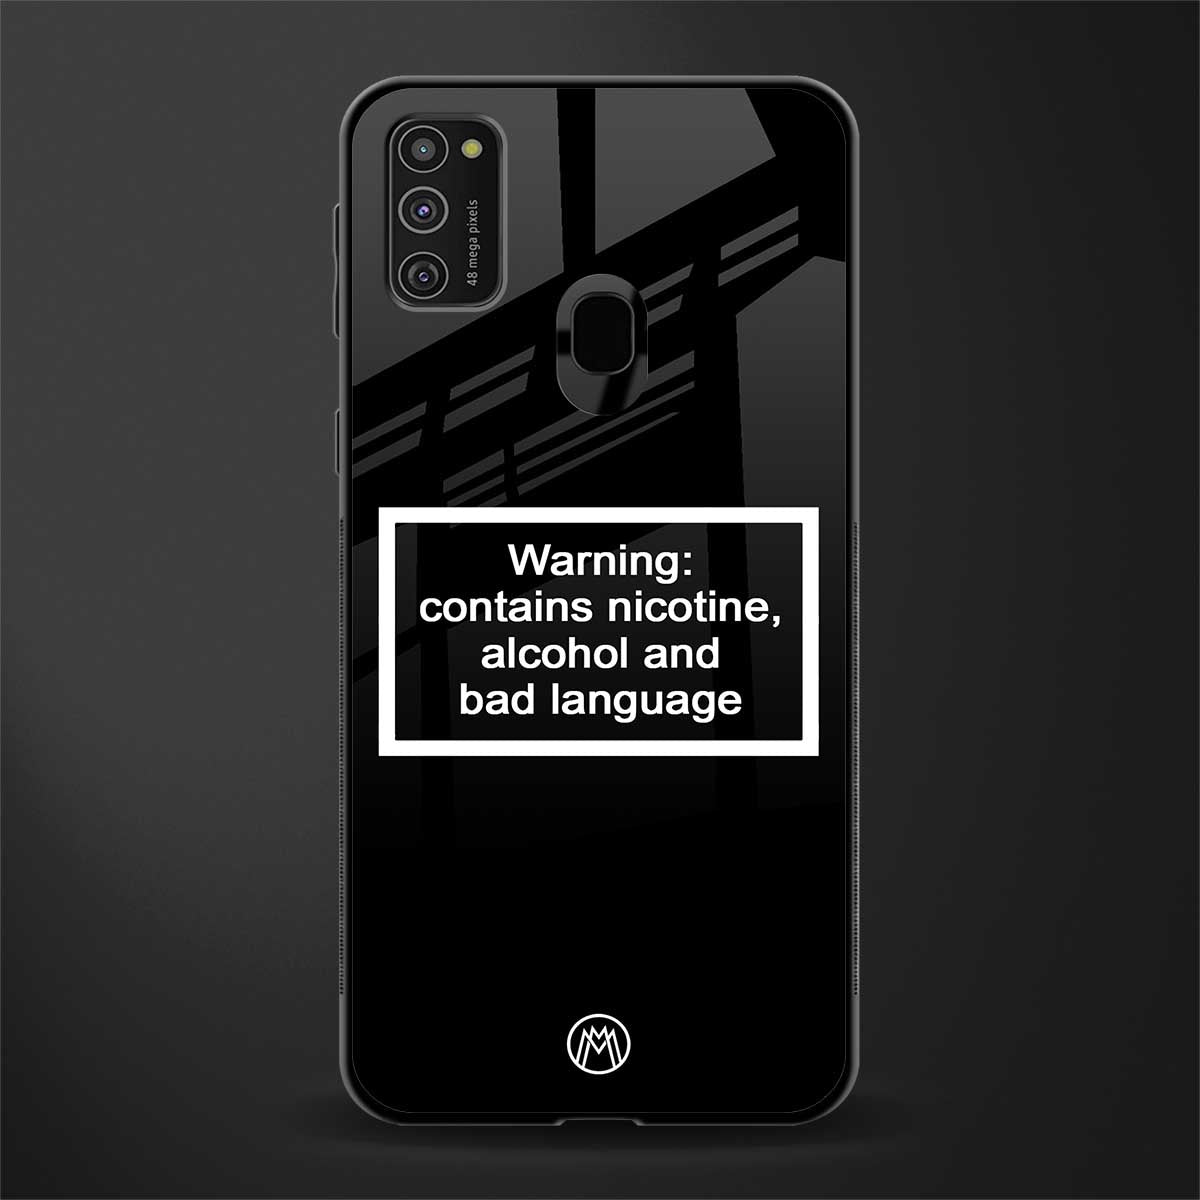 warning sign black edition glass case for samsung galaxy m30s image